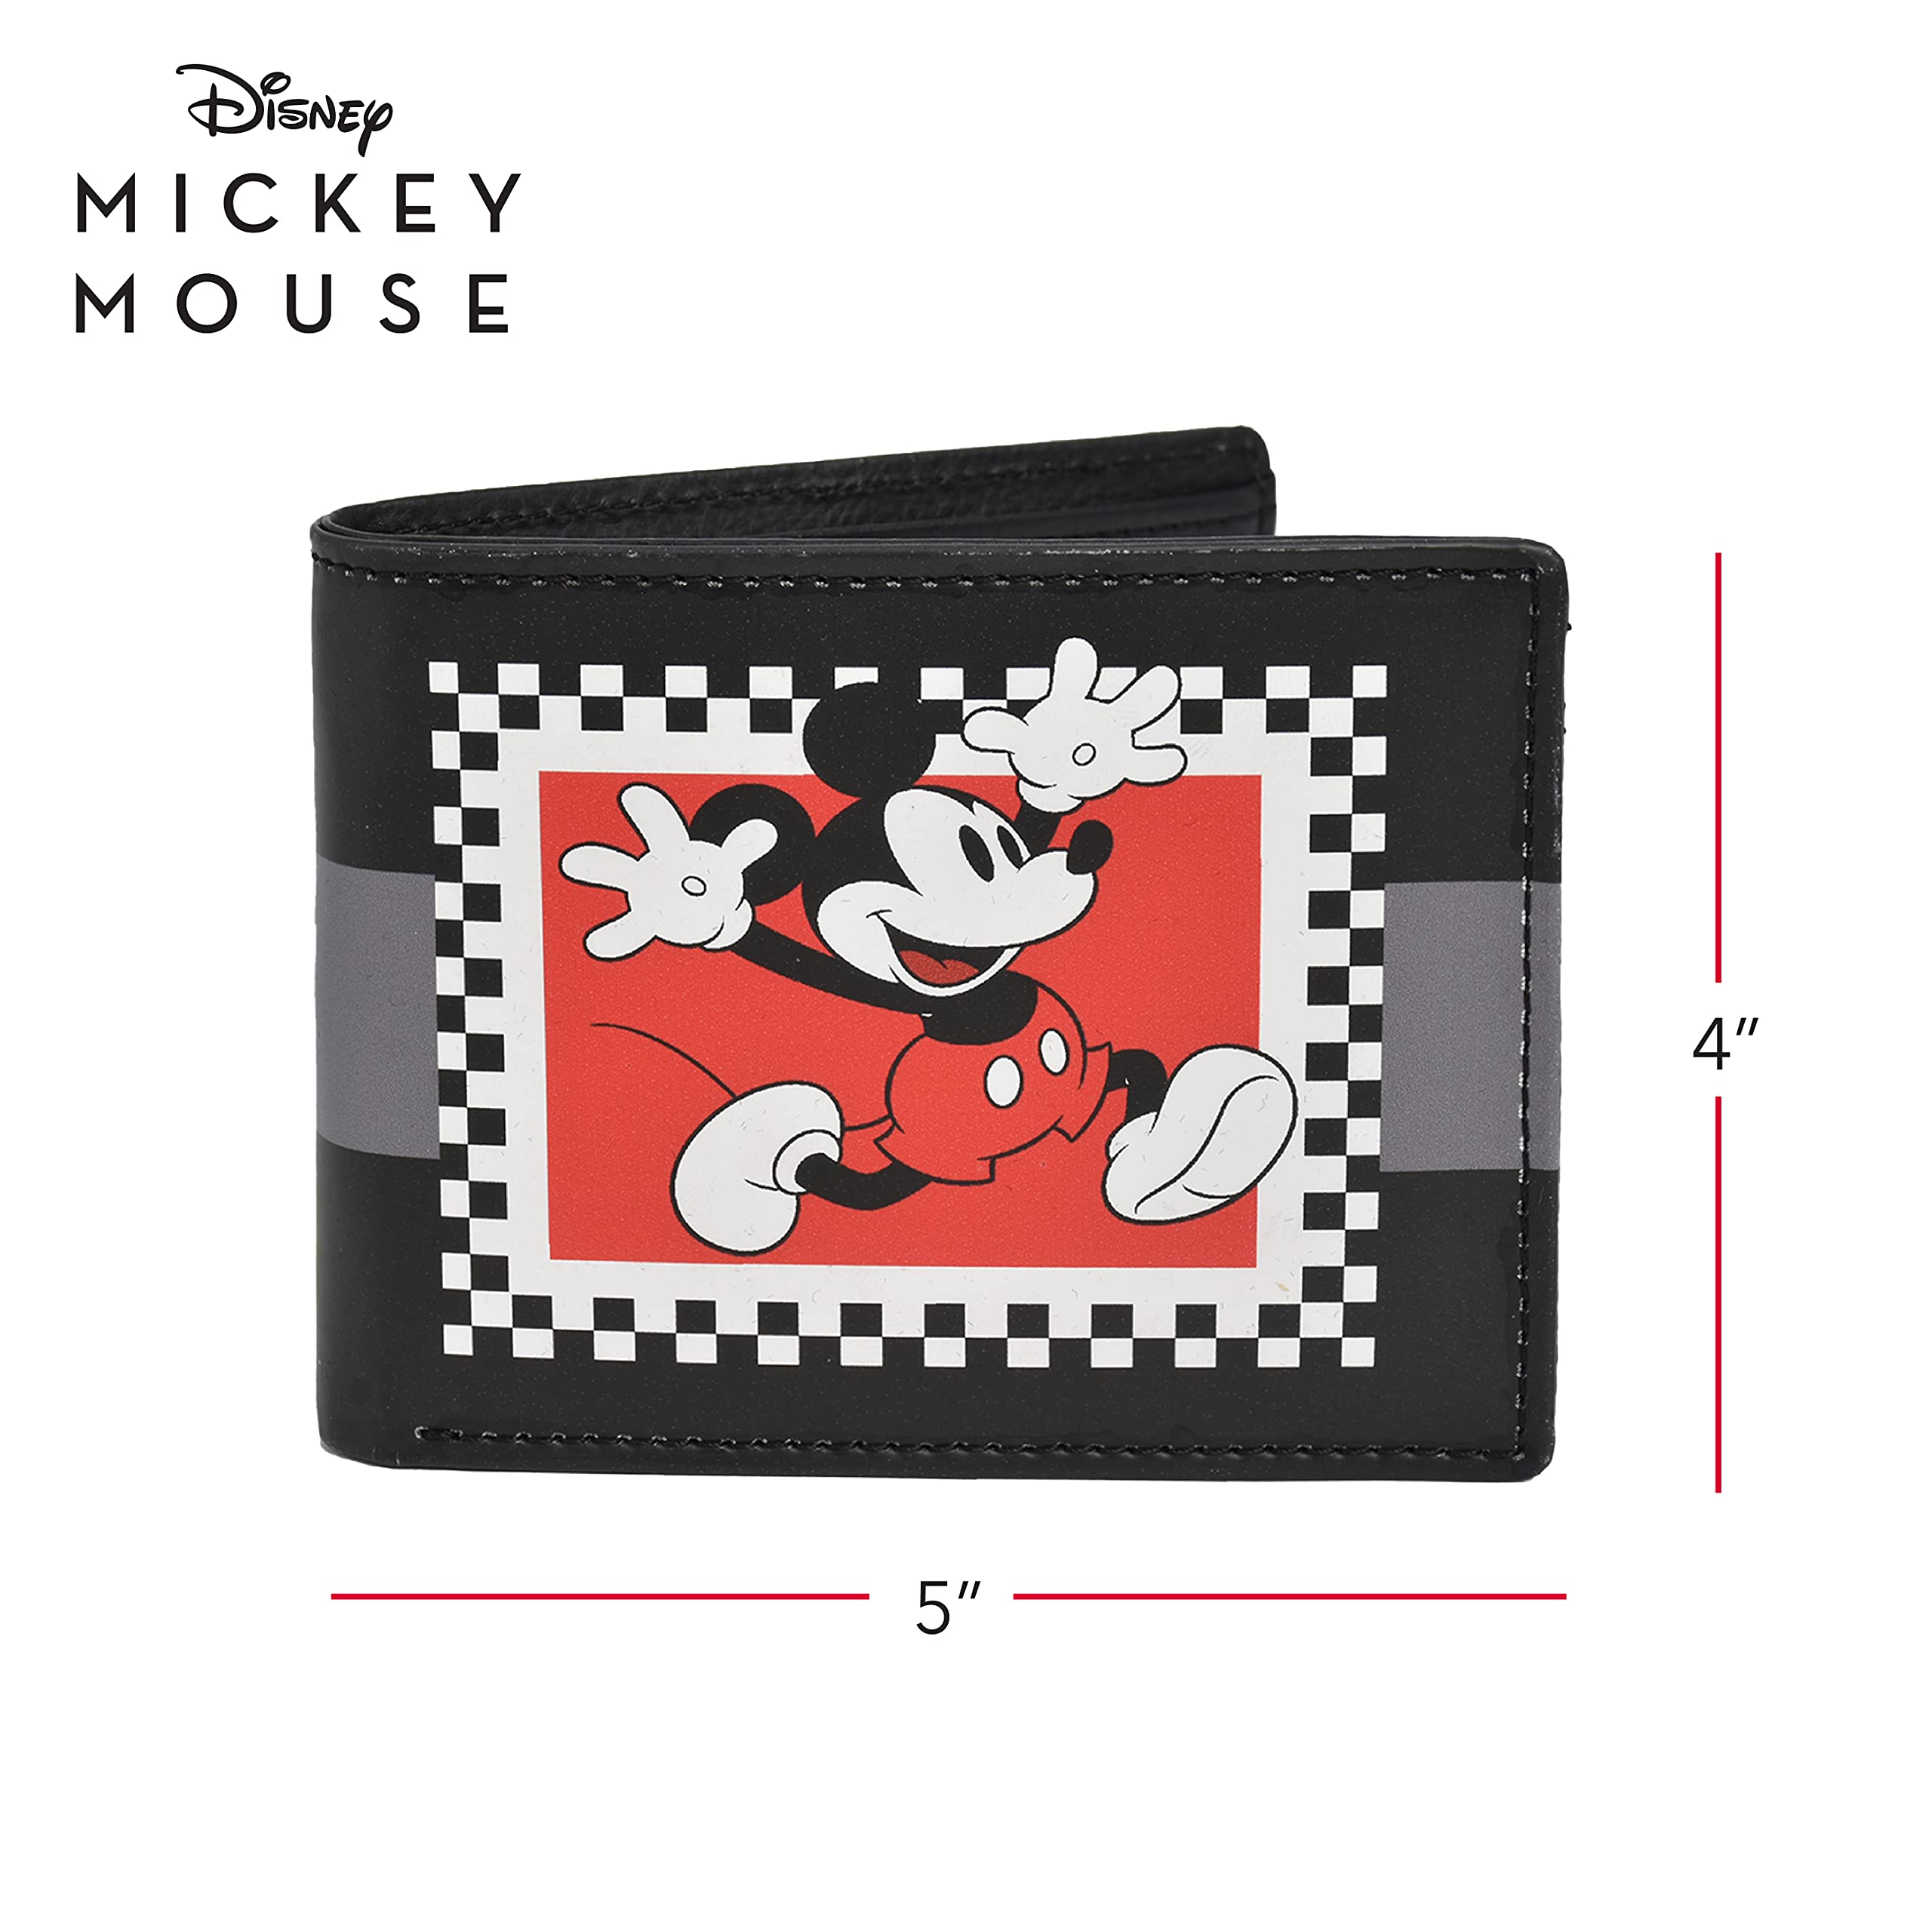 Disney's Mickey Mouse Vintage Bifold Wallet in a Decorative Tin Case, Multi